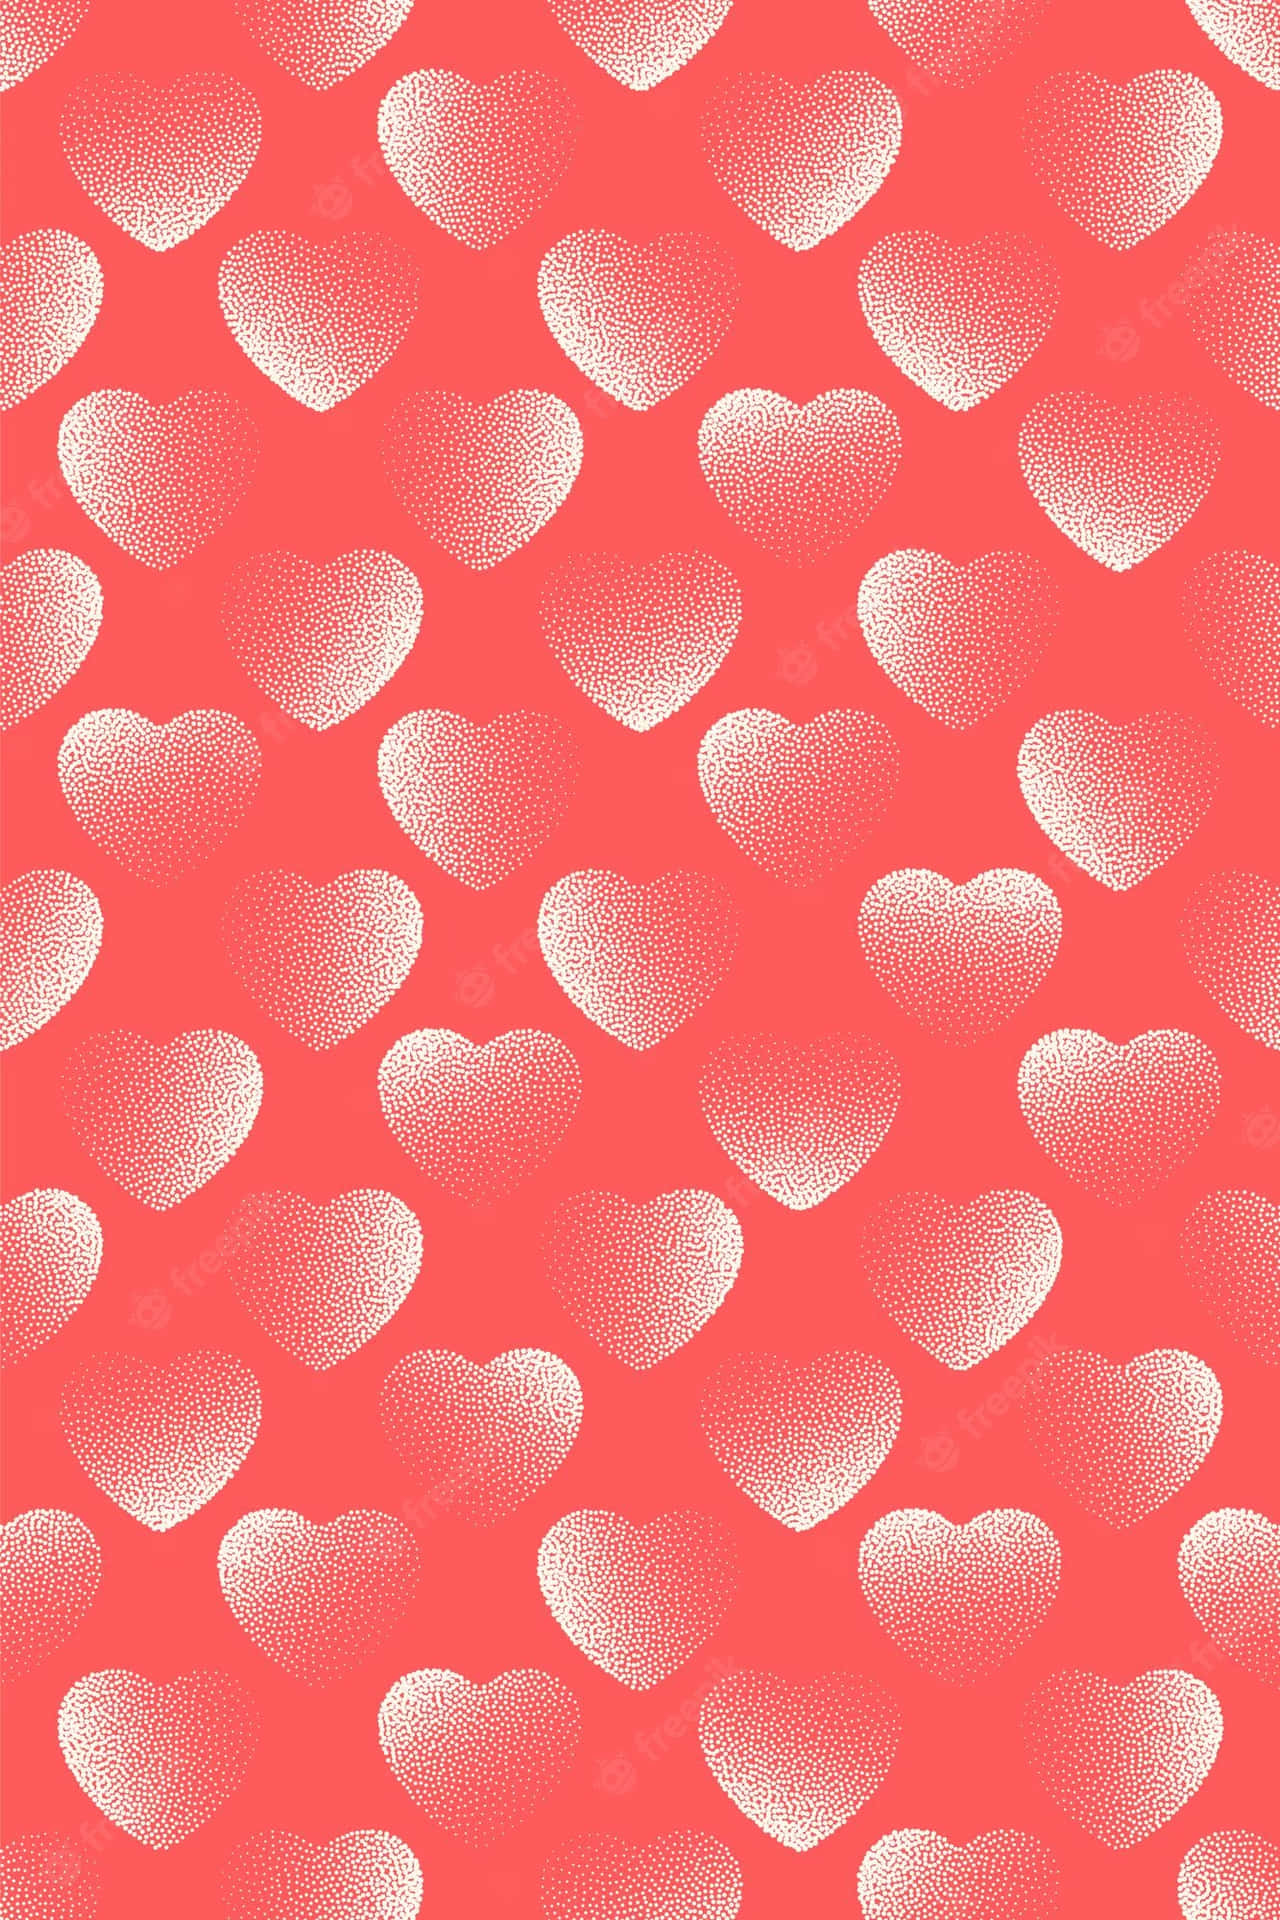 A Cluster of Cute Hearts Floating in the Sky Wallpaper